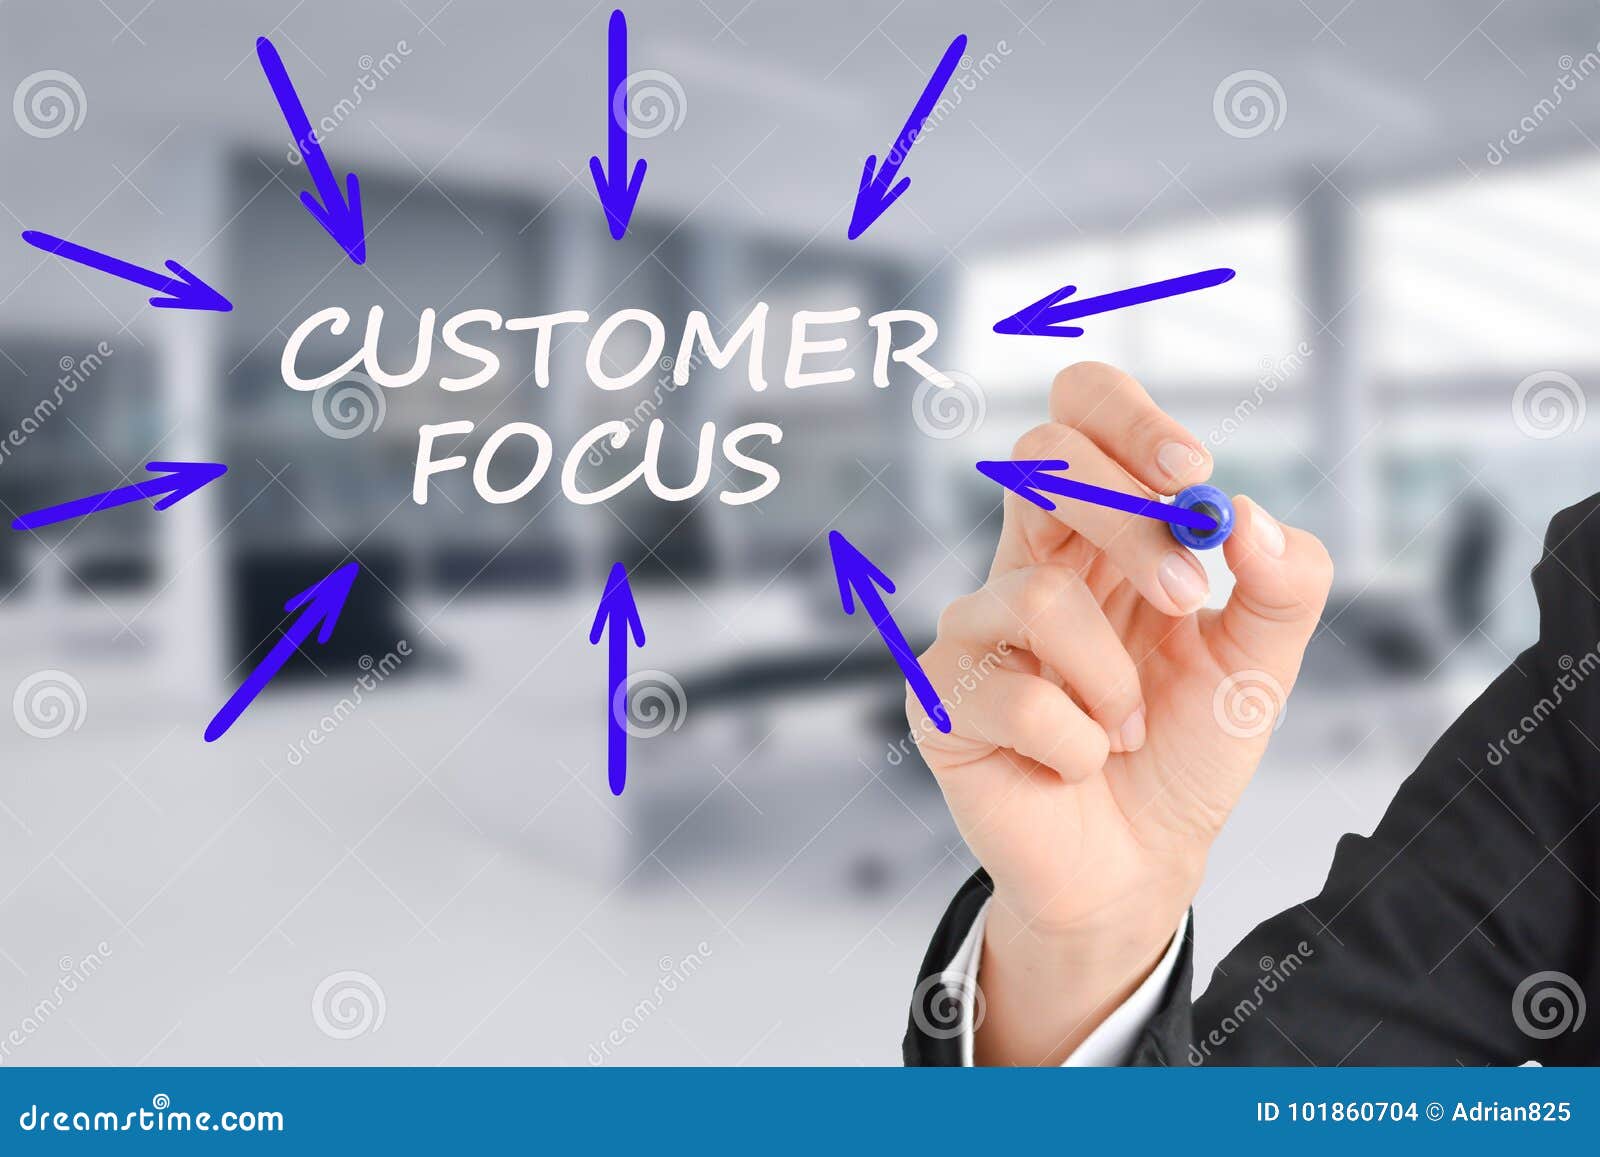 customer focus concept with businesswoman writing with marker on transparent background